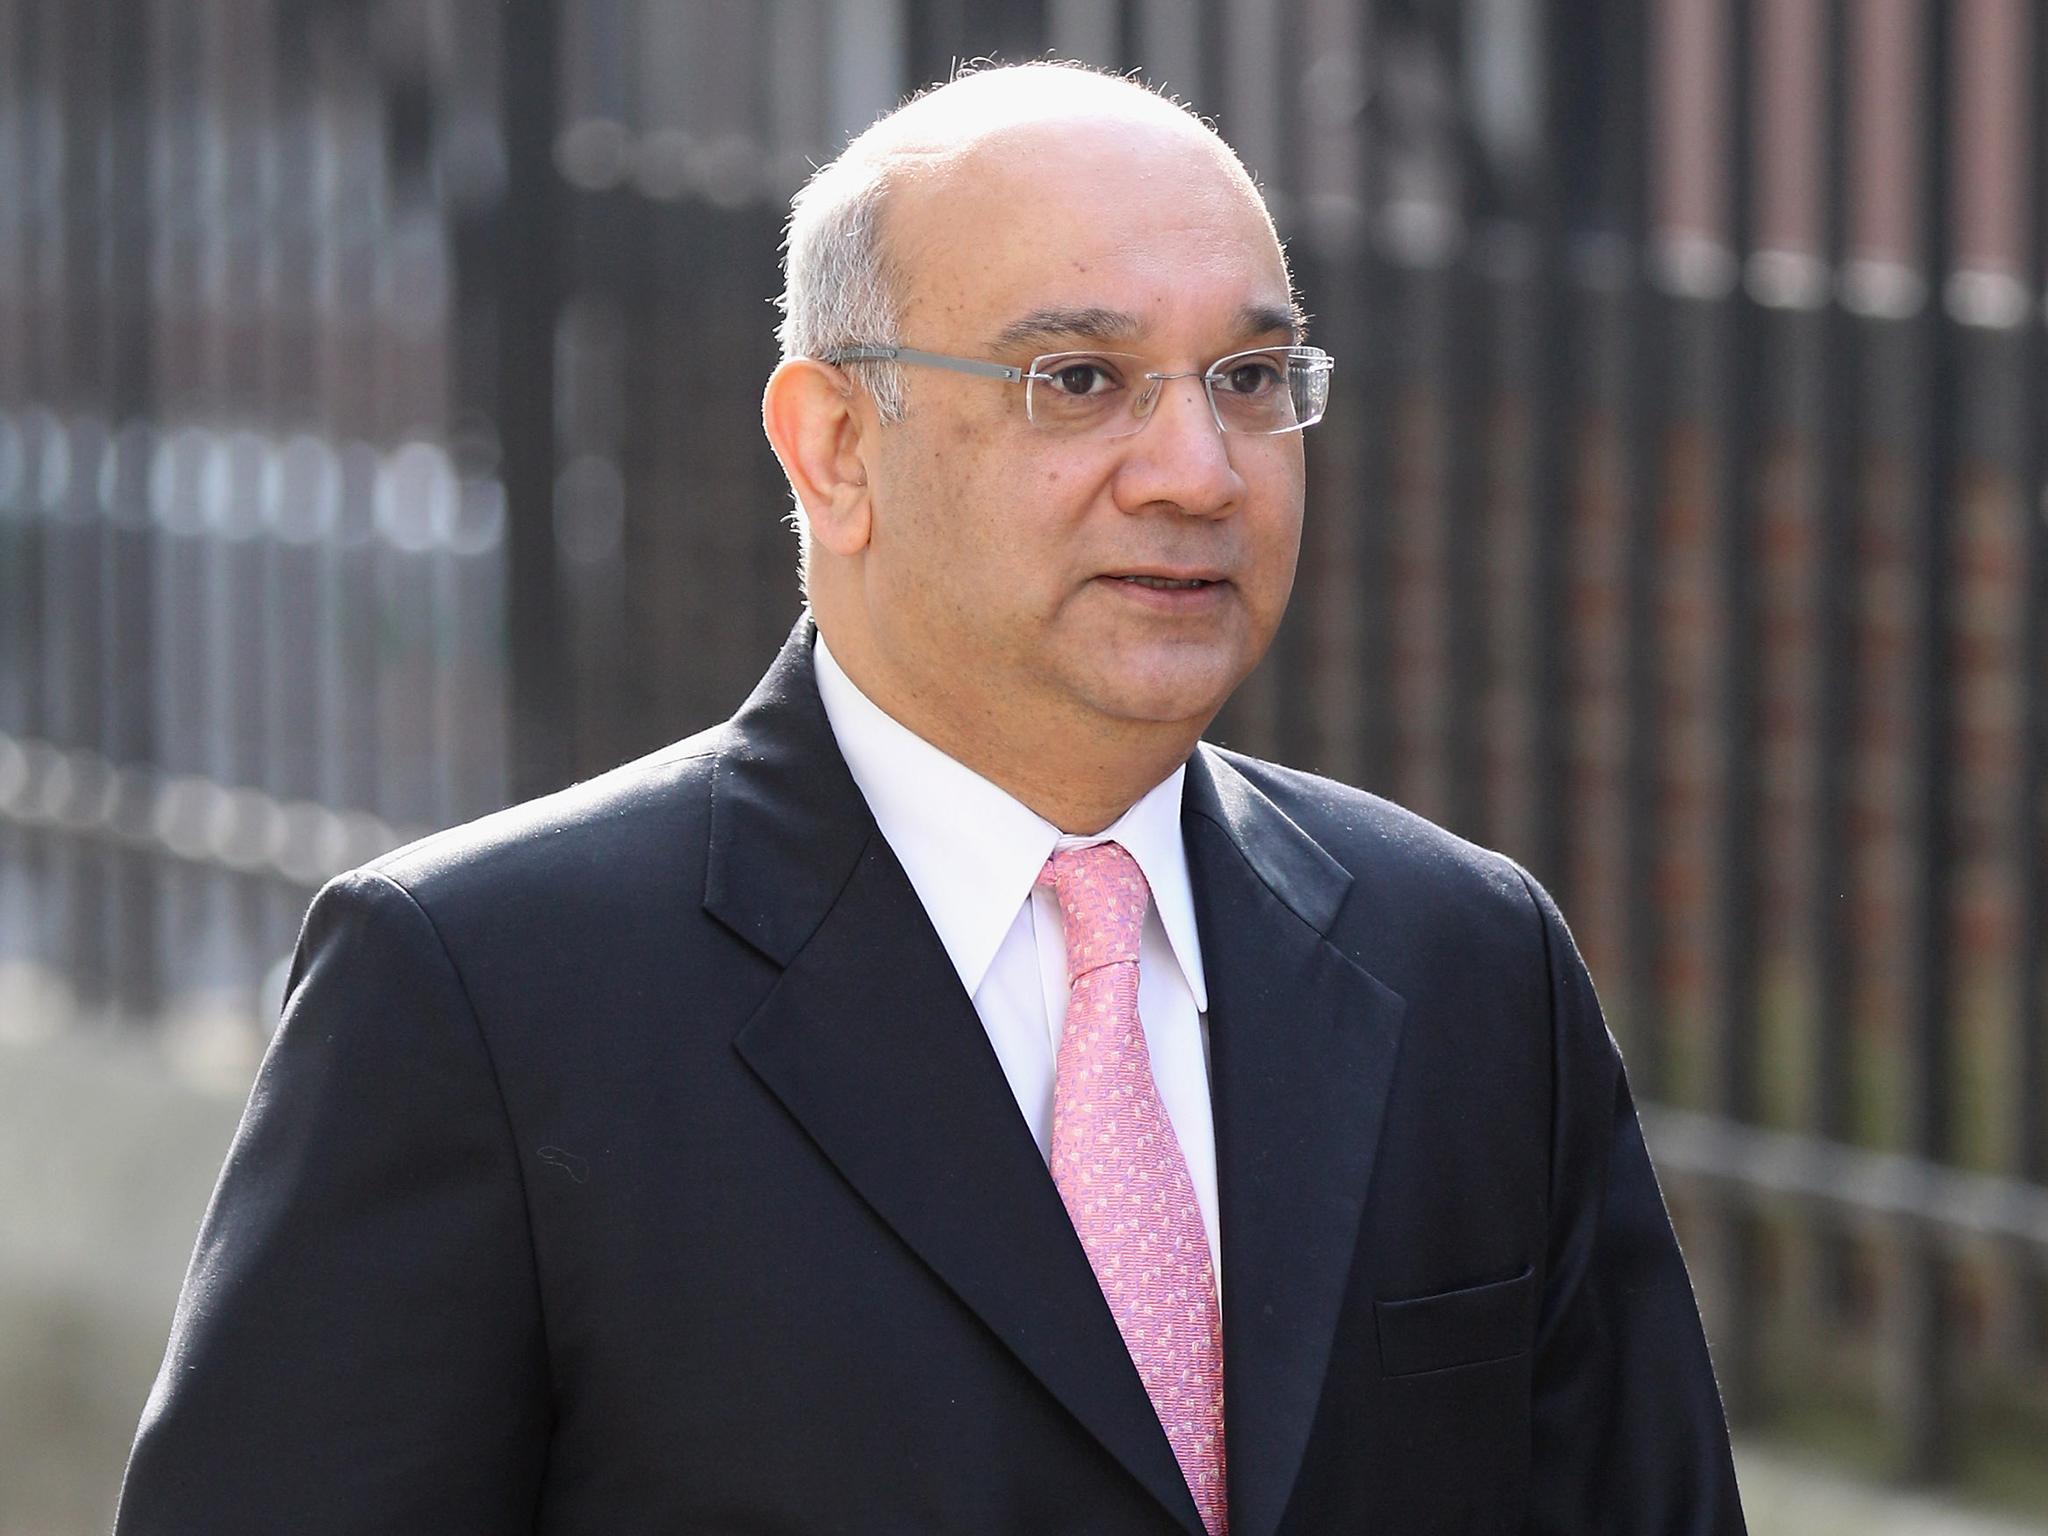 Keith Vaz: 'Our immigration system has left A&amp;E and has entered intensive care'